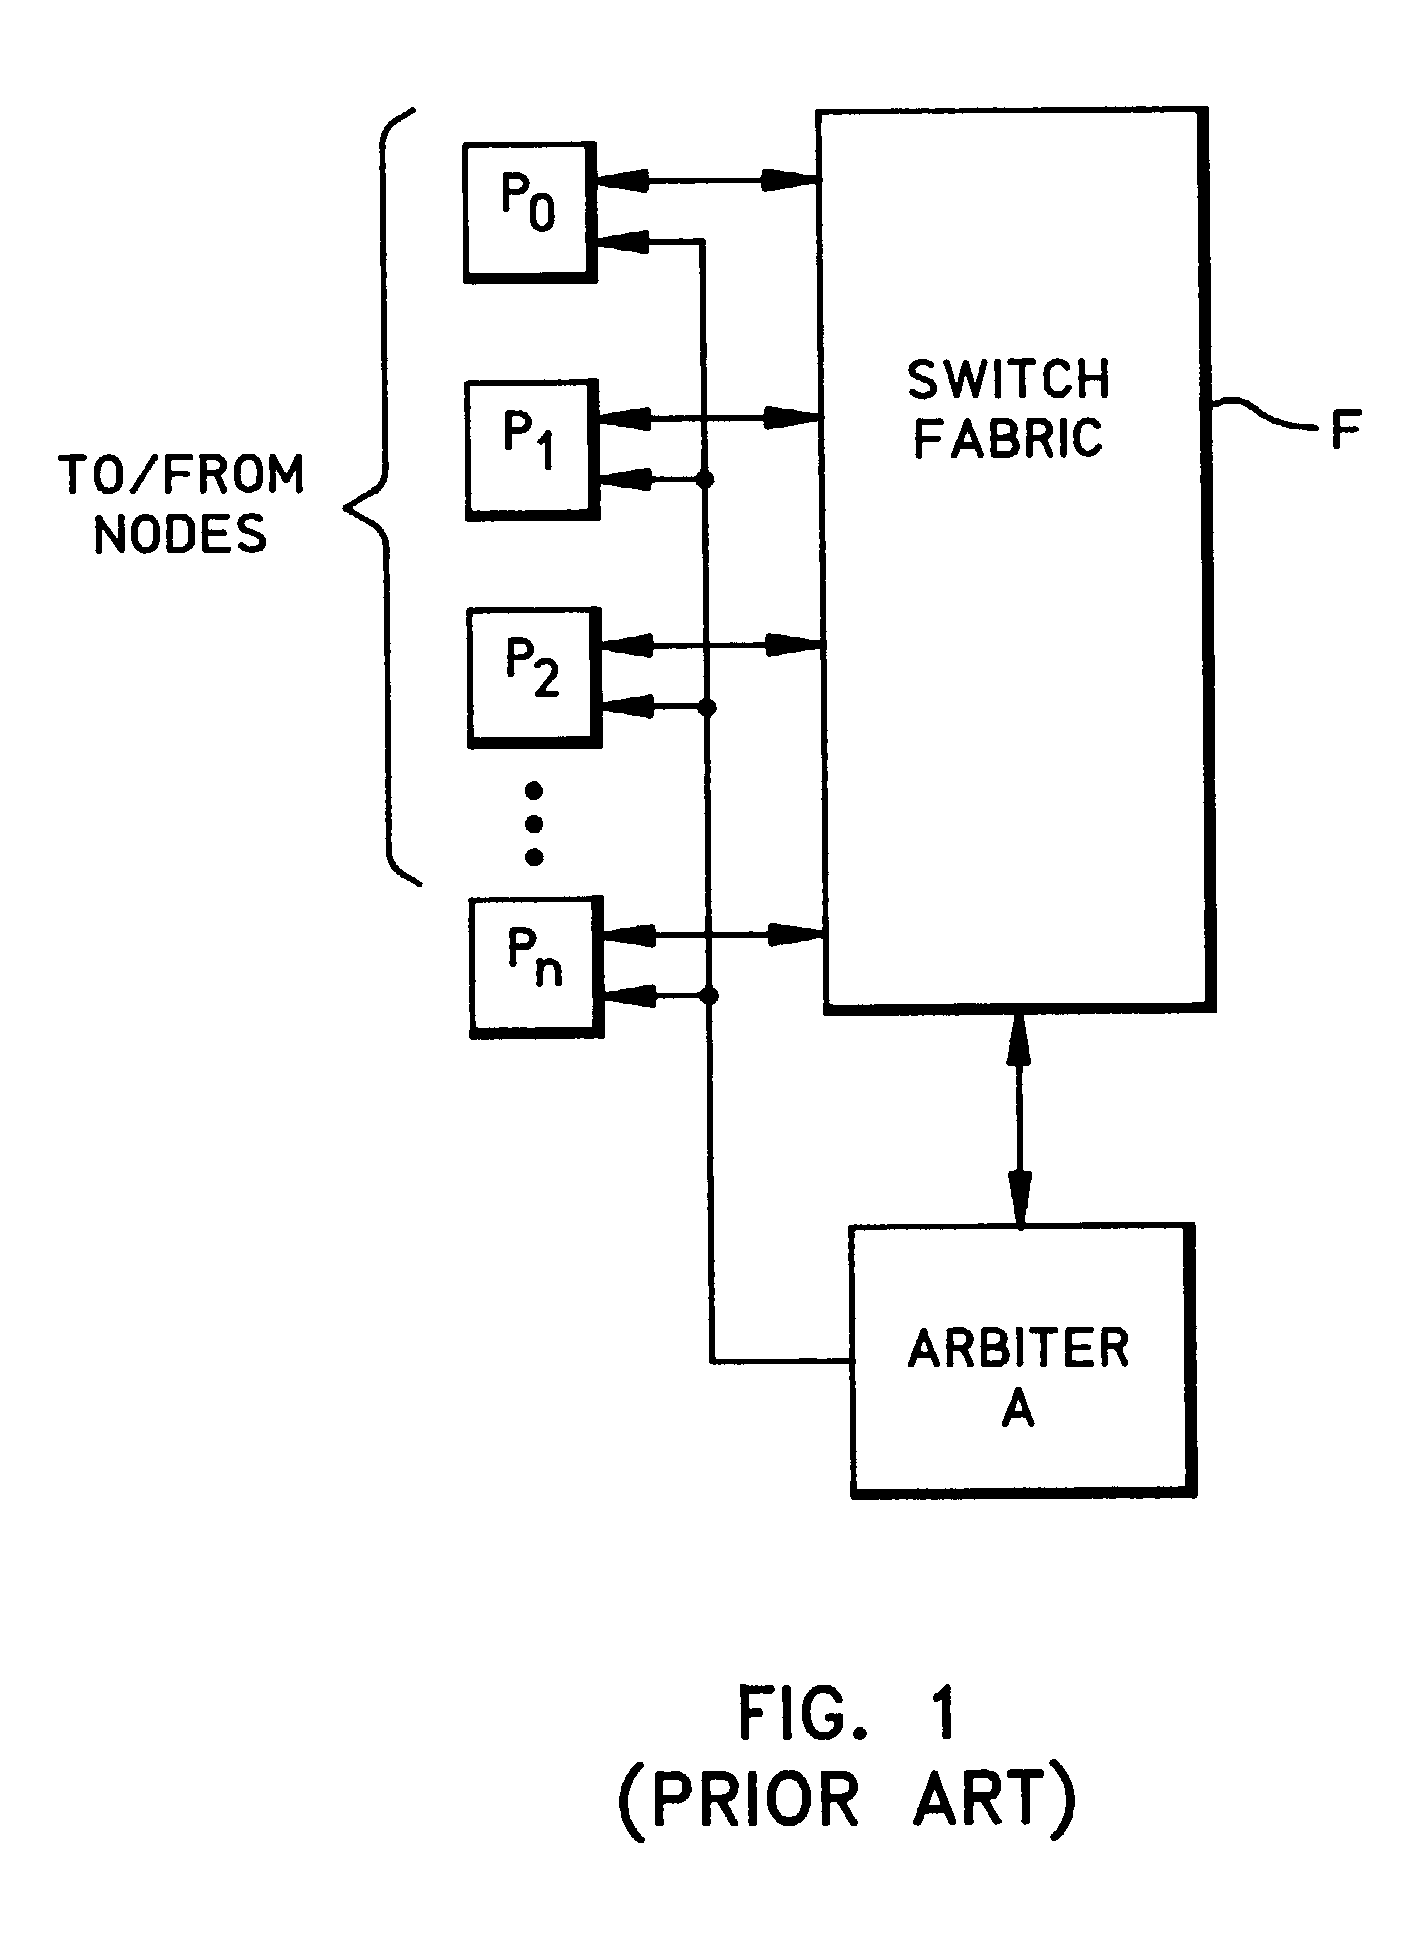 System and method for hierarchical switching